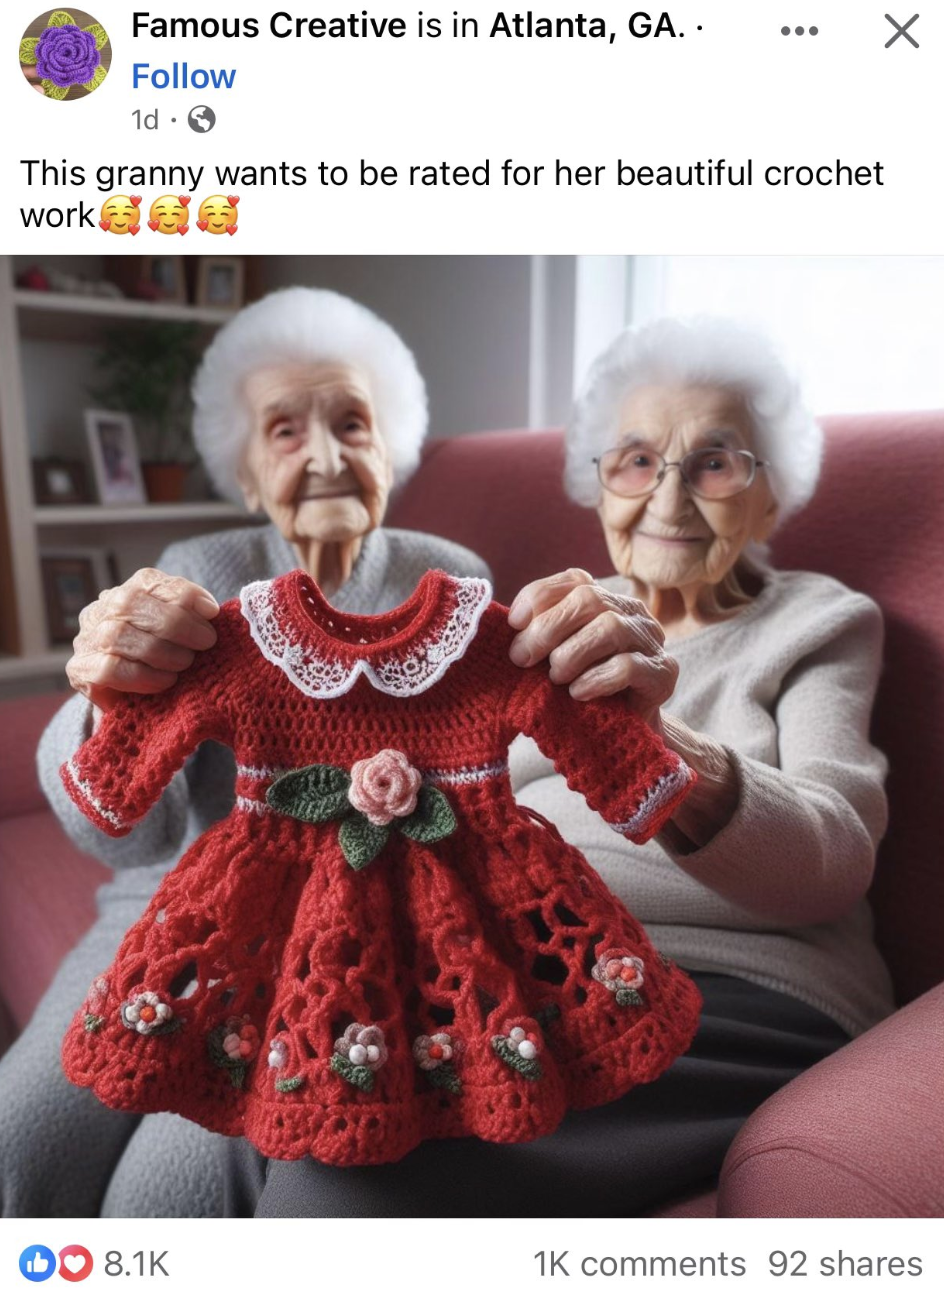 crochet - Famous Creative is in Atlanta, Ga.. 1d. This granny wants to be rated for her beautiful crochet work 00 1K 92